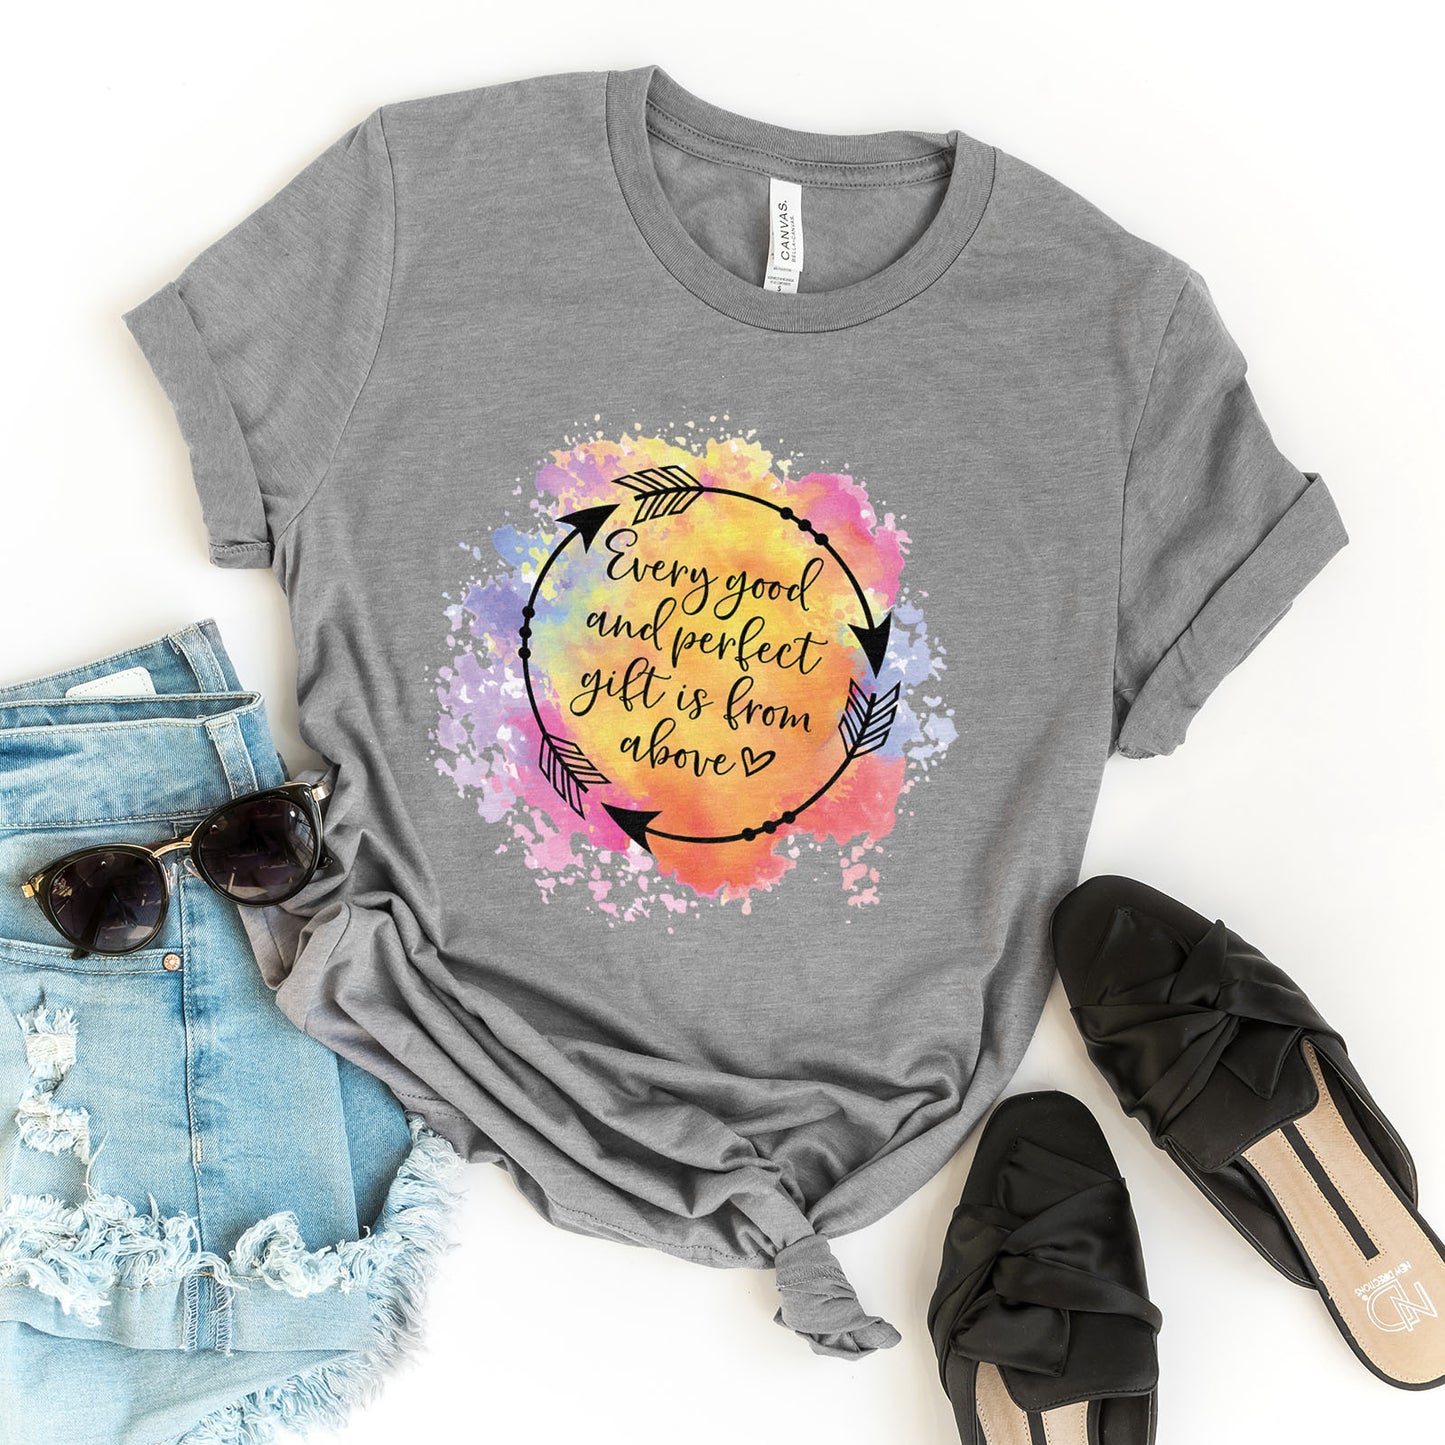 Every Good and perfect Gift Is From Above Tee Shirts For Women - Christian Shirts for Women - Religious Tee Shirts